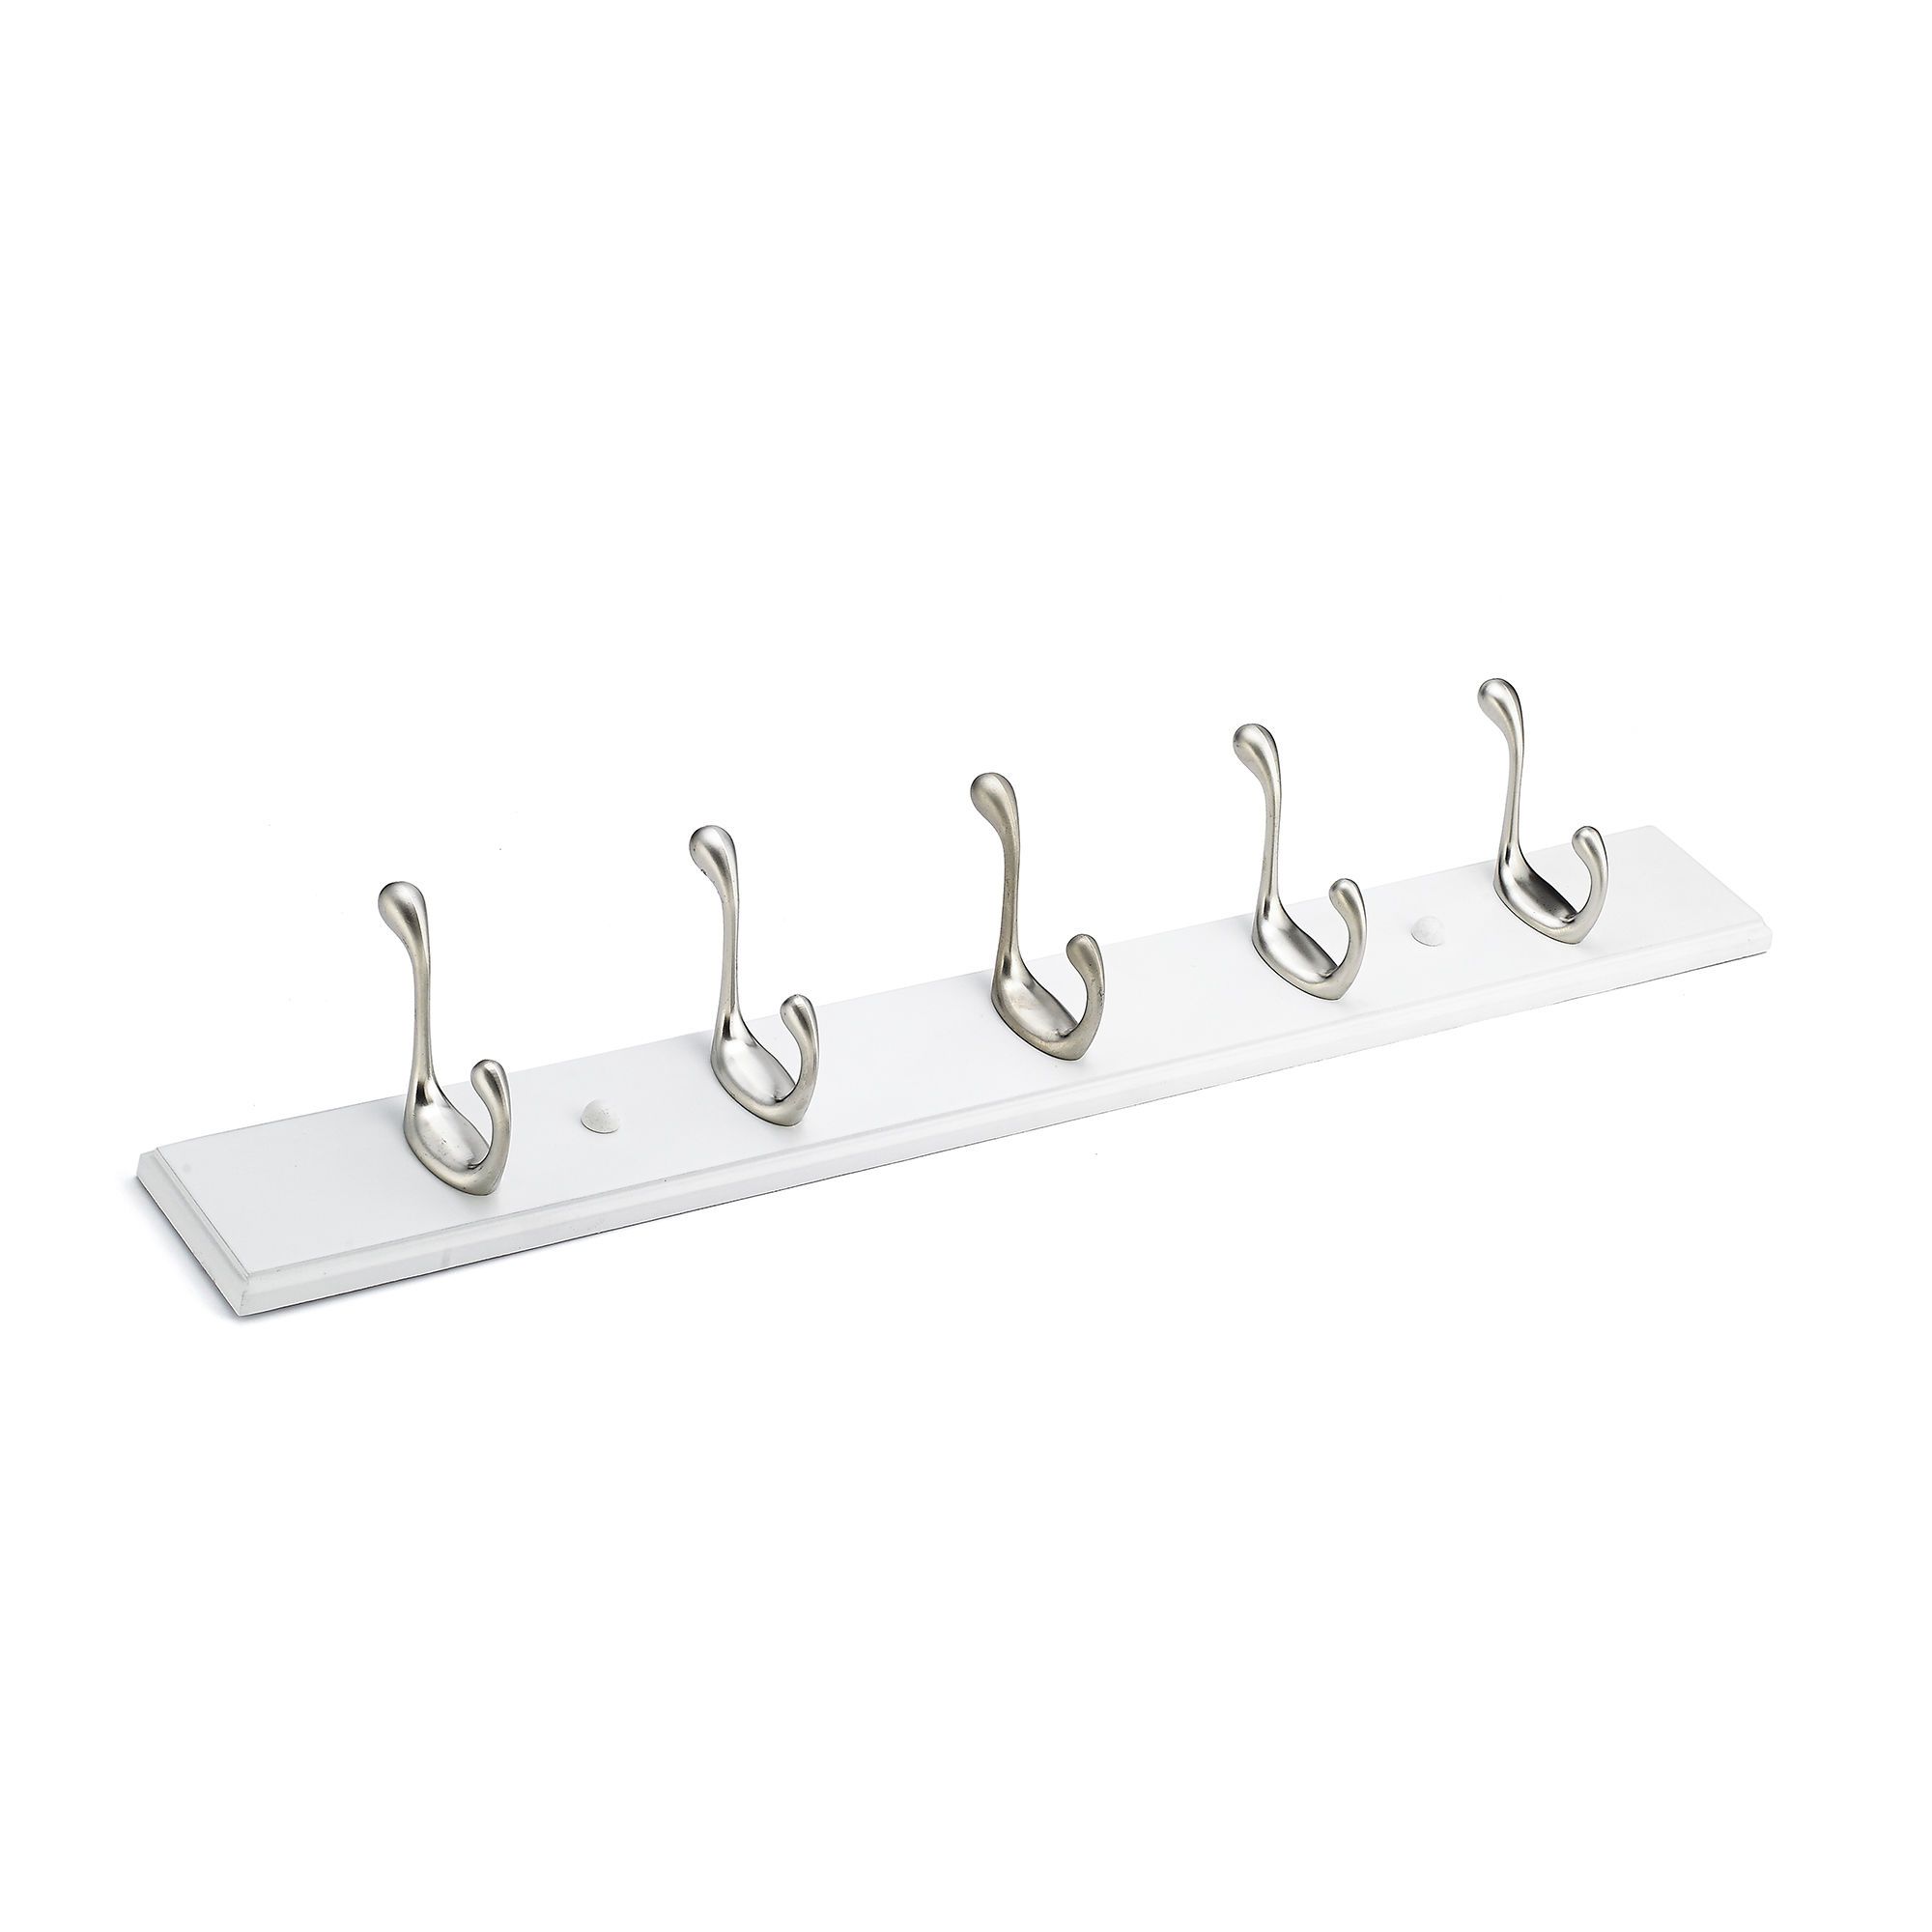 Utility Hook Rack - White - 605 mm x 92 mm from RICHELIEU